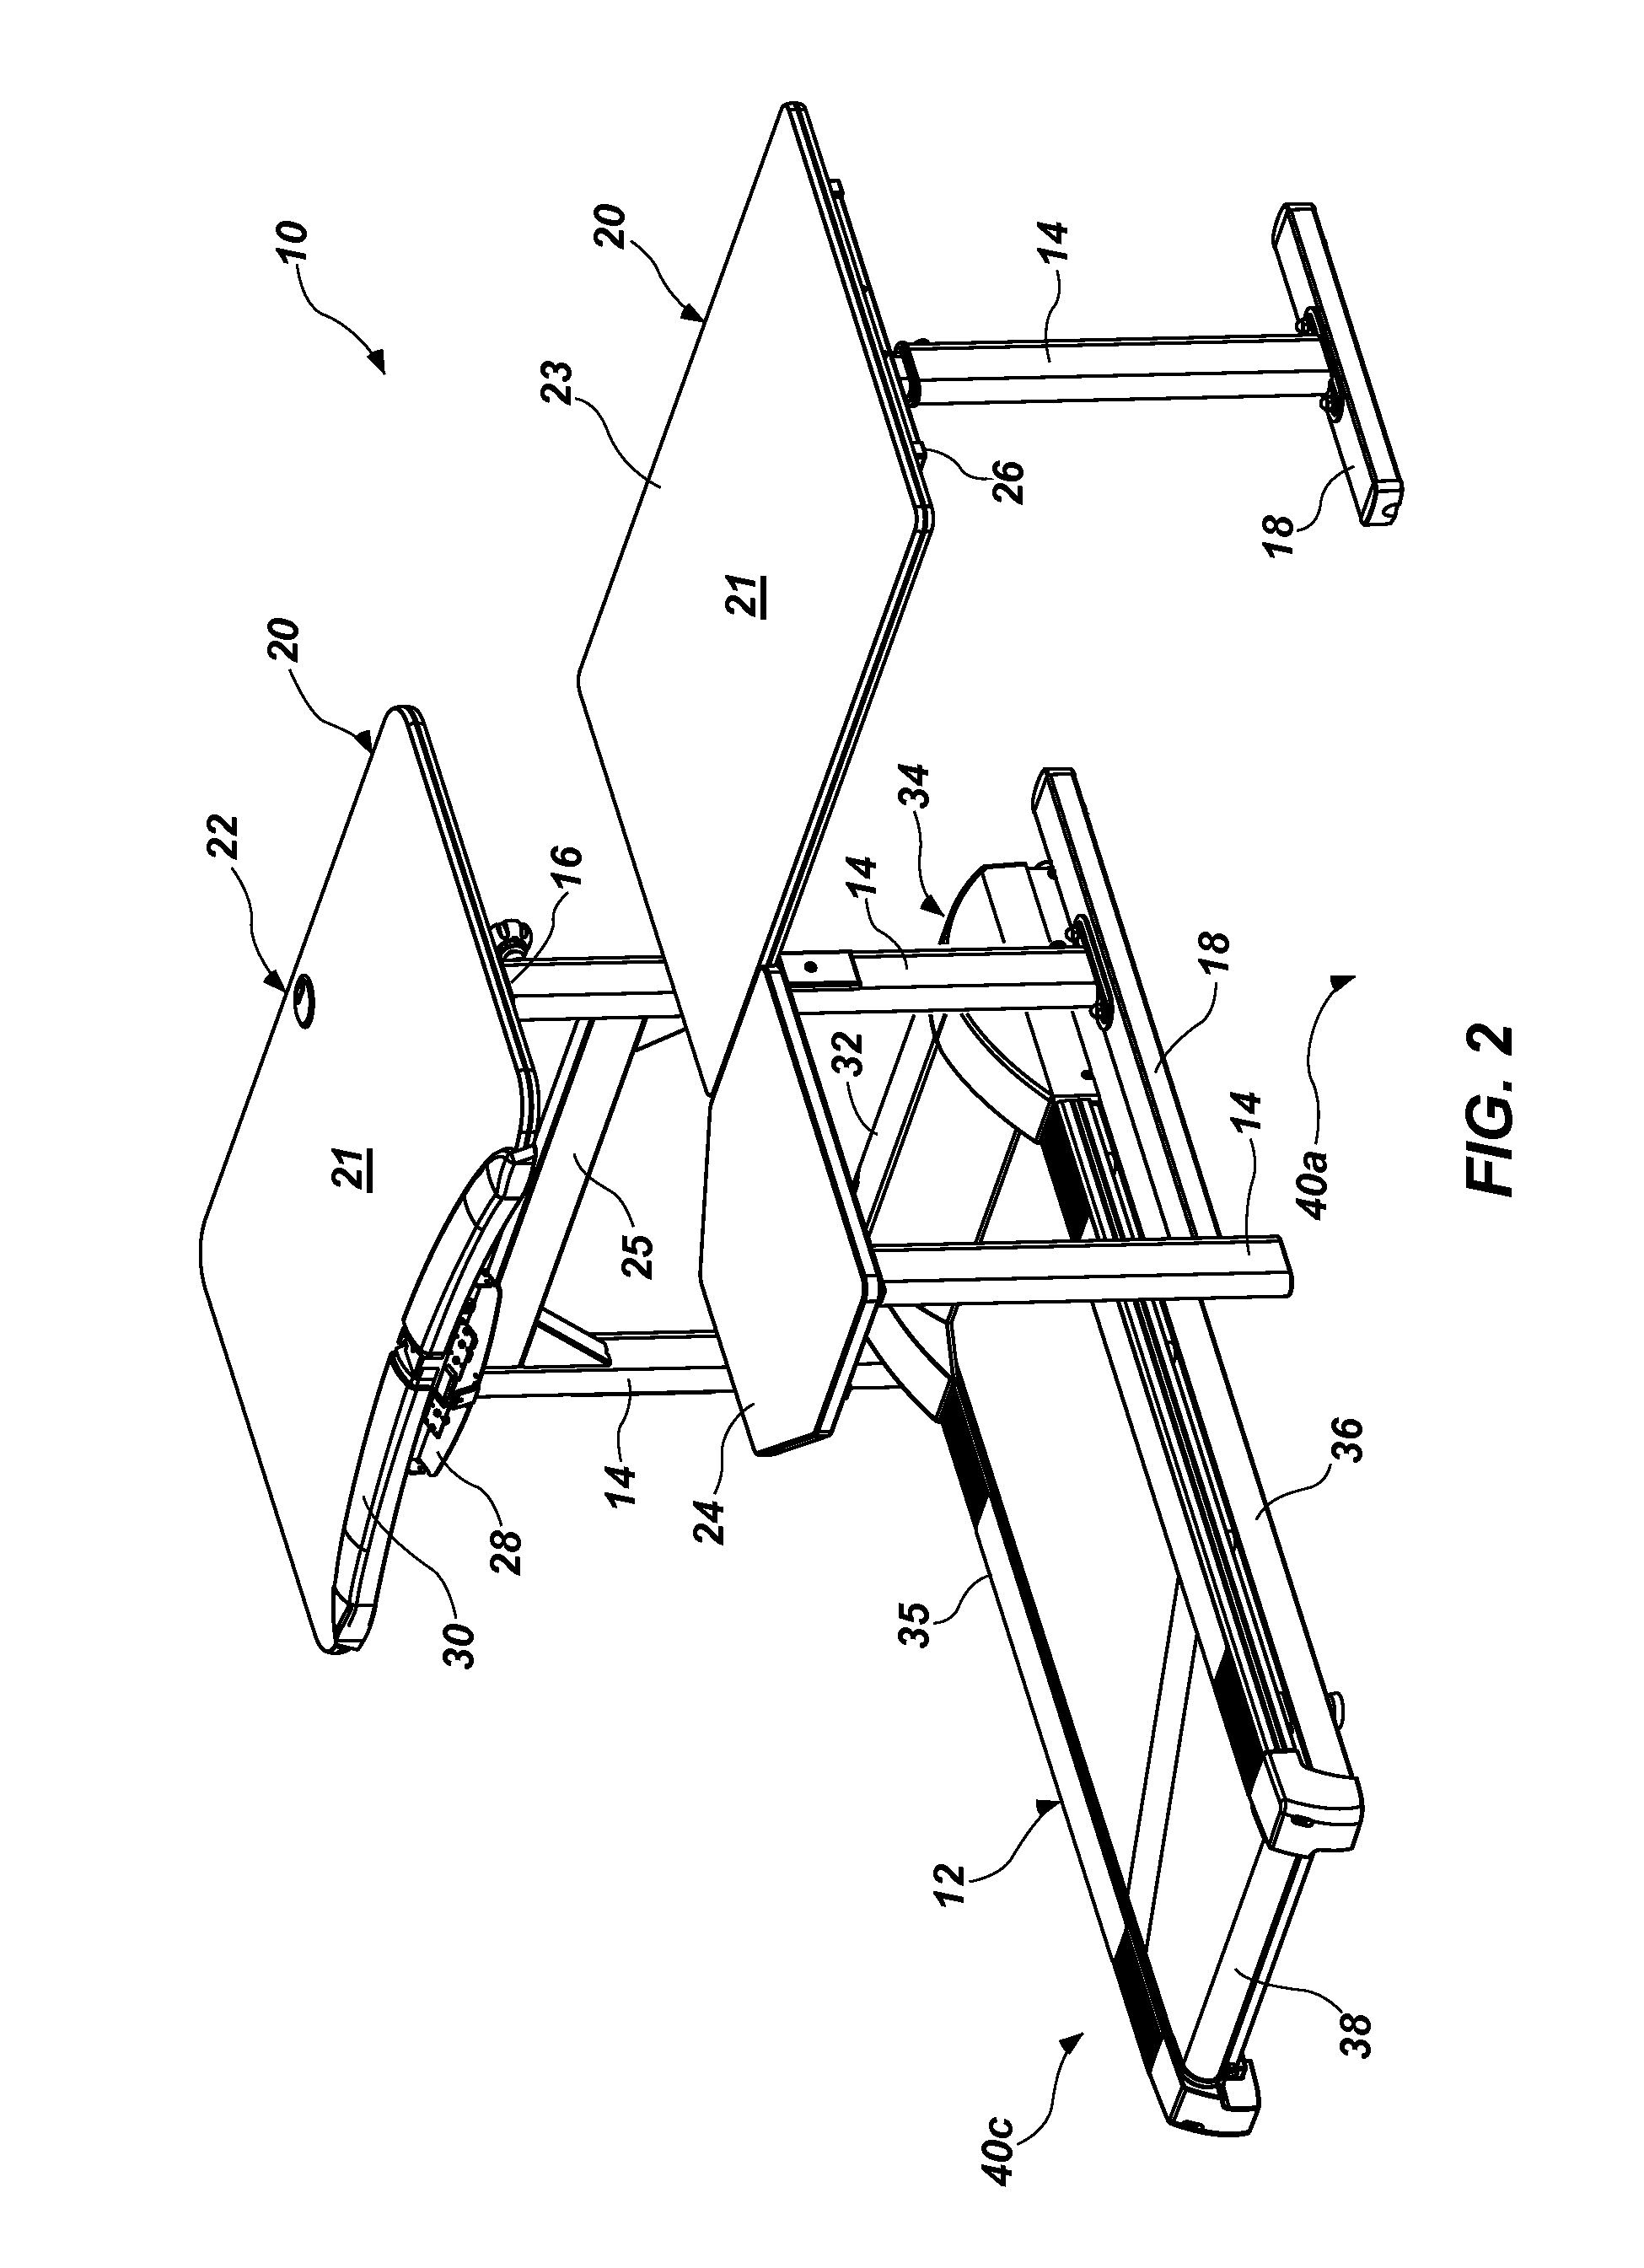 Active workstation apparatus and method